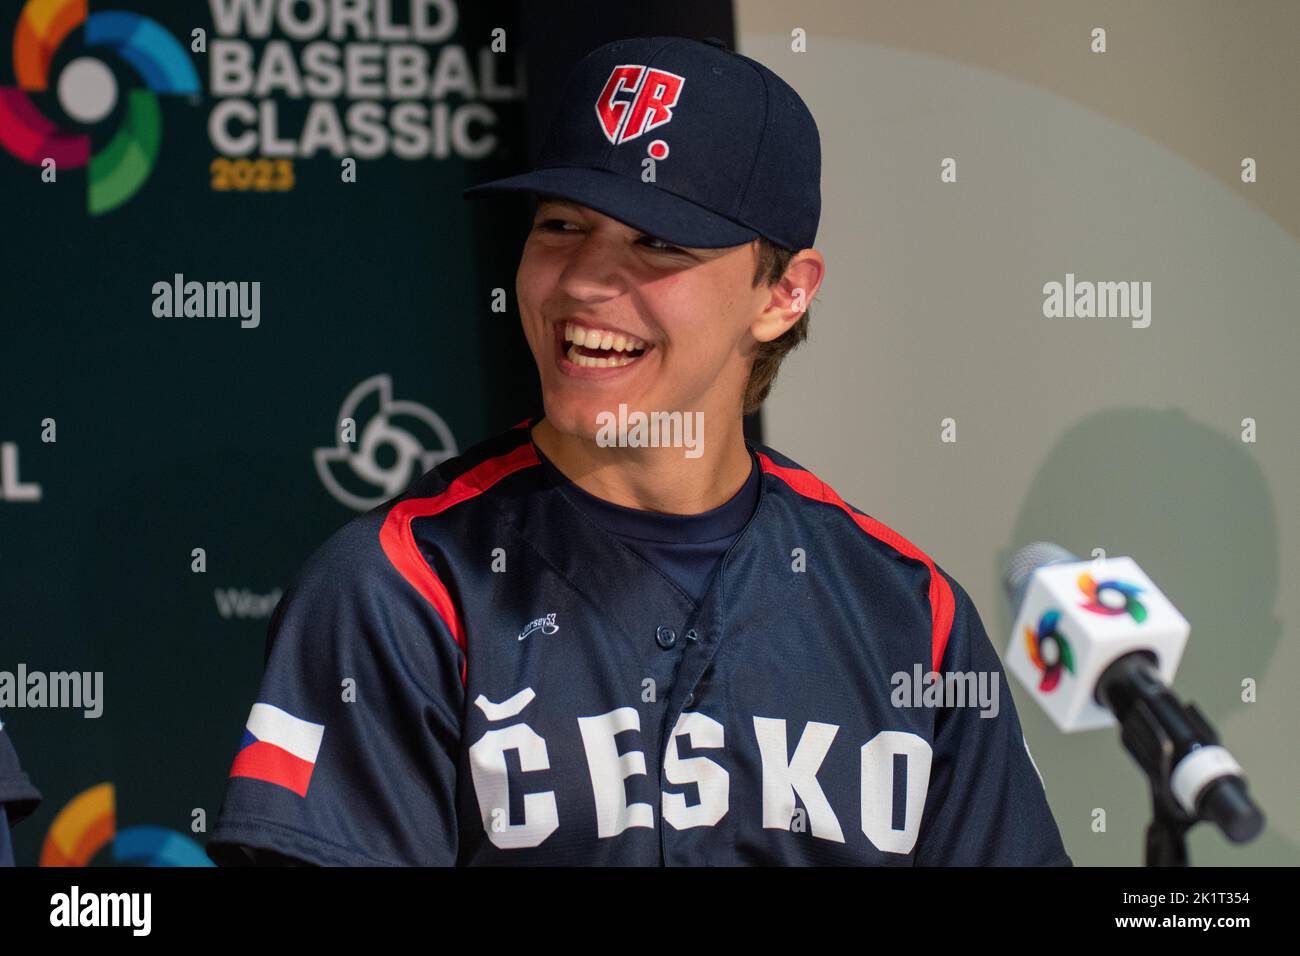 Regensburg, Bavaria, Germany. 20th Sep, 2022. Czech pitcher MICHAL KOVALA  laughs during the press conference after beating Germany in the World  Baseball Classic qualifier in the Armin Wolf Baseball Arena in Regensburg,